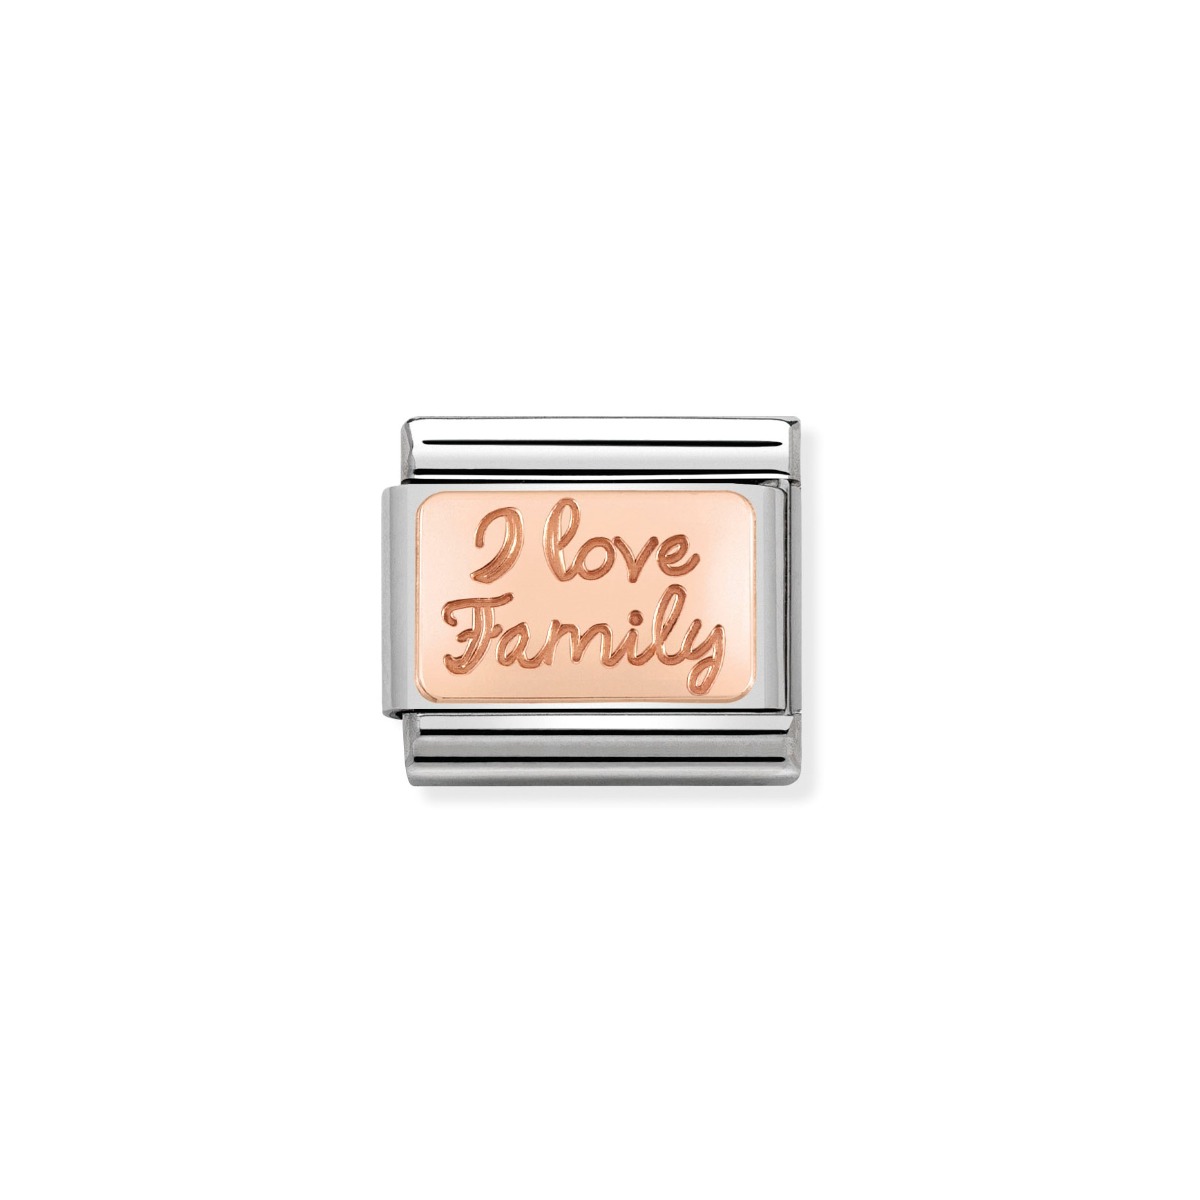 Nomination Classic I Love Family Rose Gold Charm